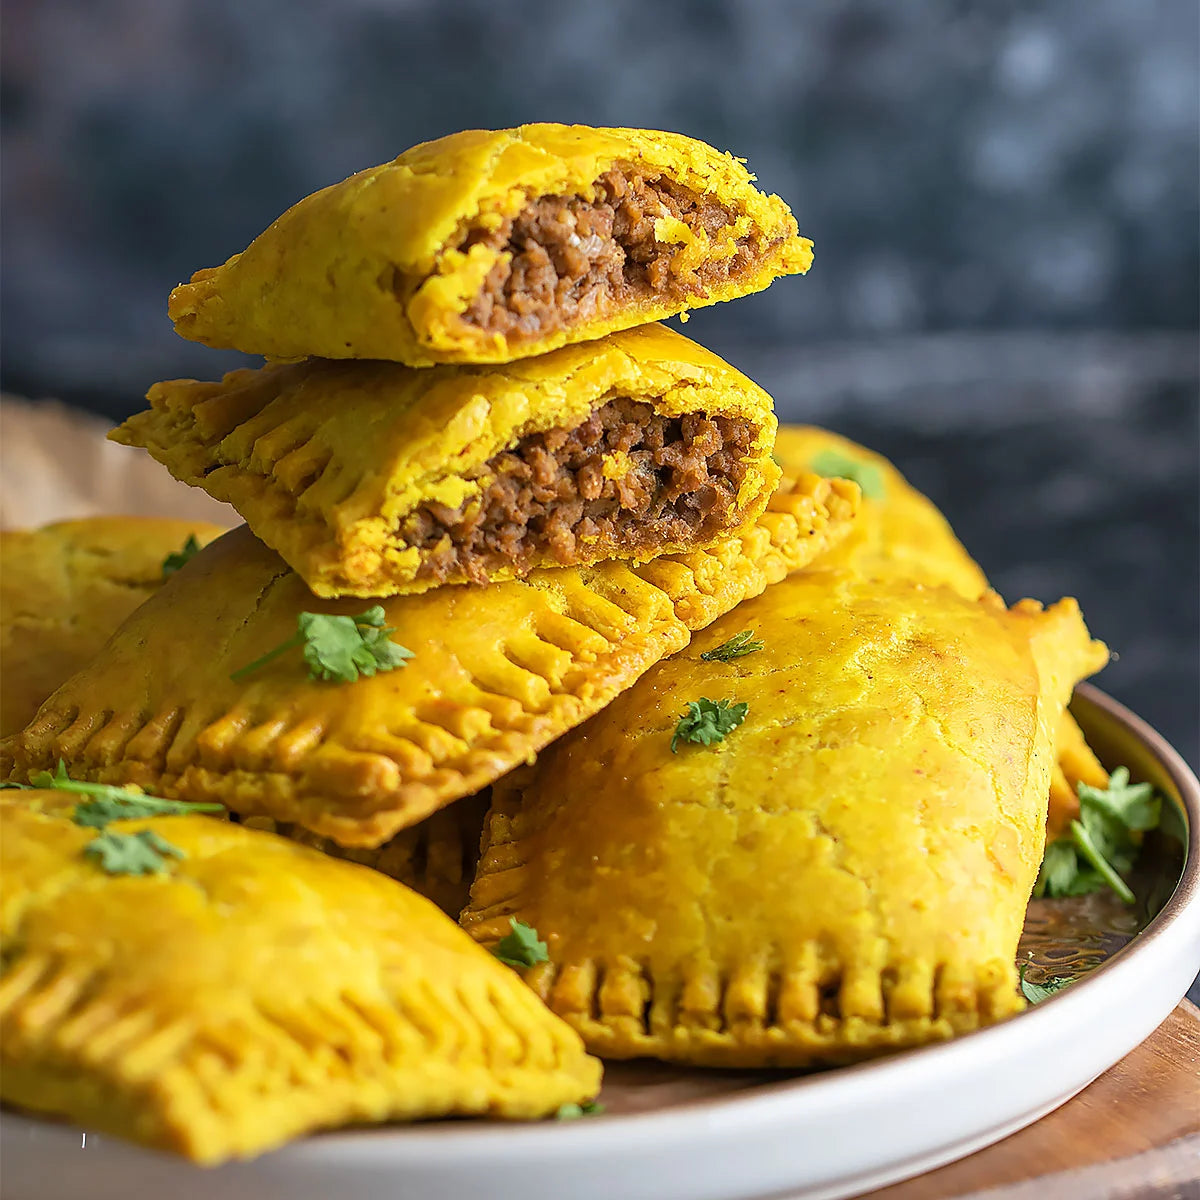 JAMAICAN SPICY BEEF PATTY